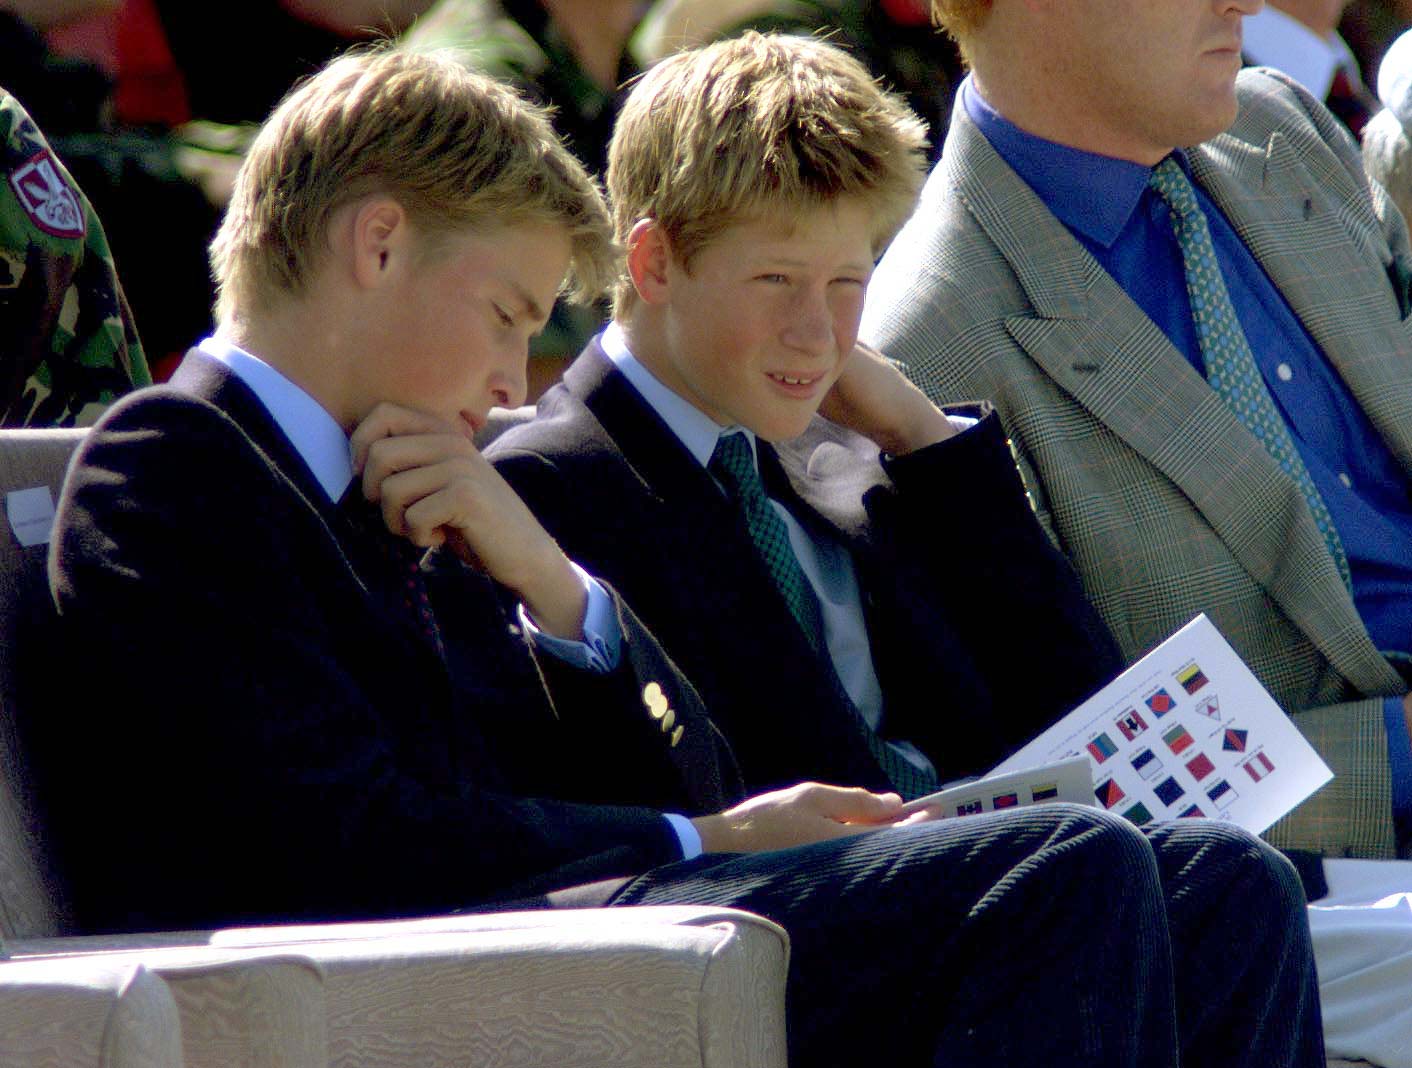 Prince William and Prince Harry during the launch of the Sixteenth Air Assault Brigade, at RAF Wattisham, Suffolk. / Source: Getty Images